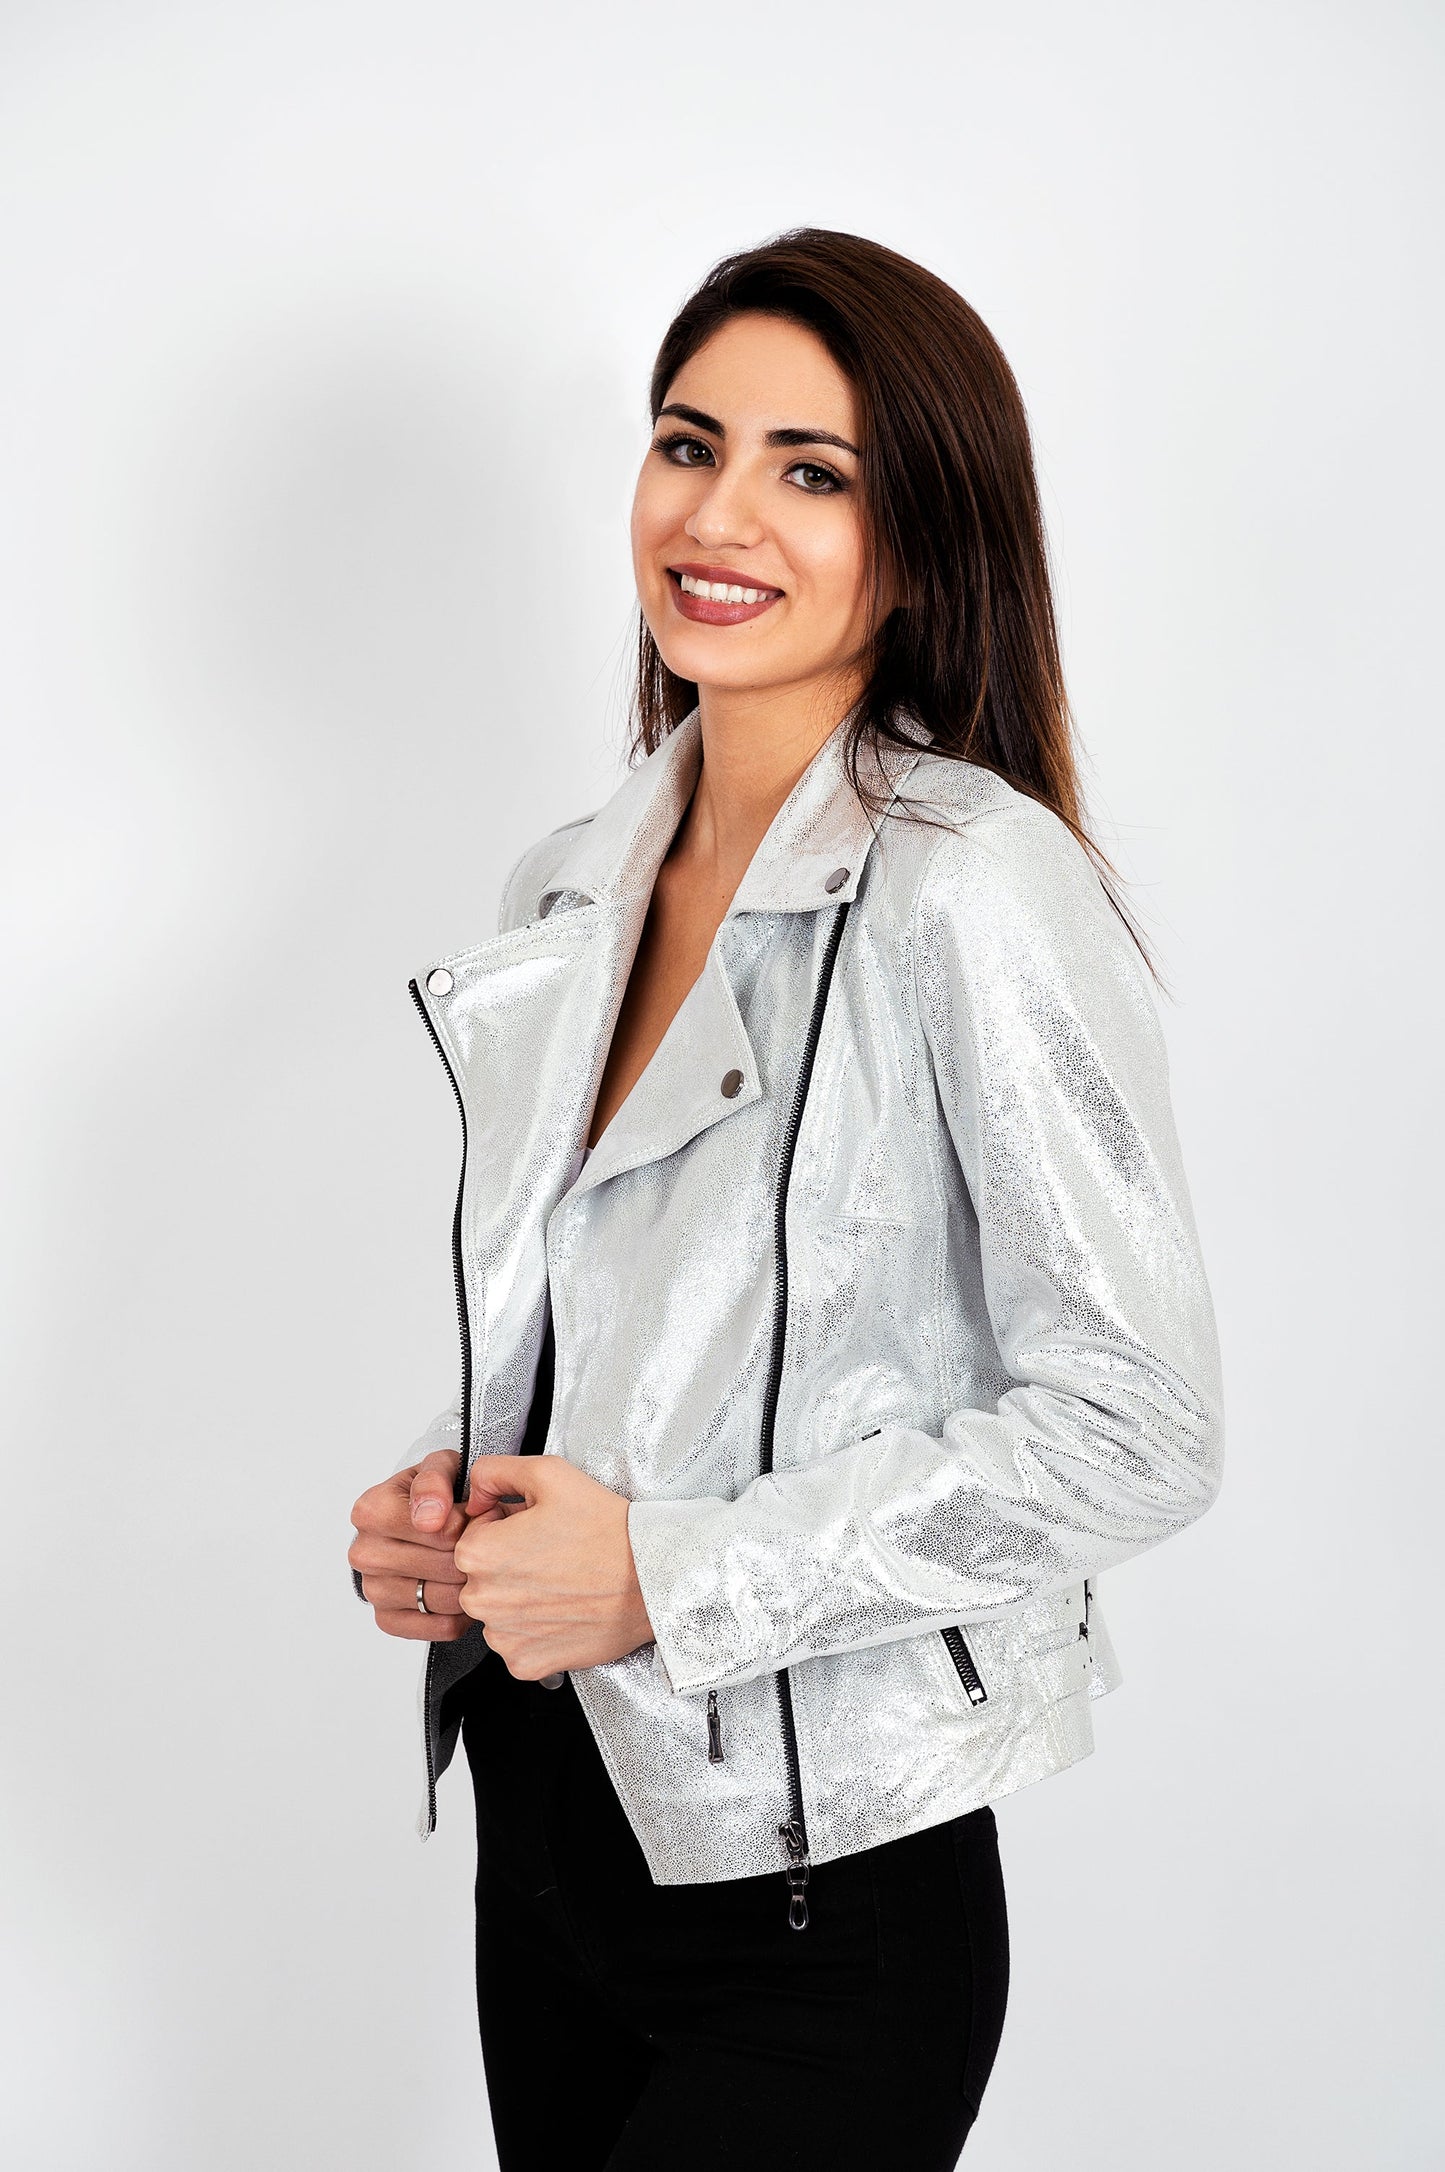 Custom Genuine Leather Jacket for Wedding with Date under